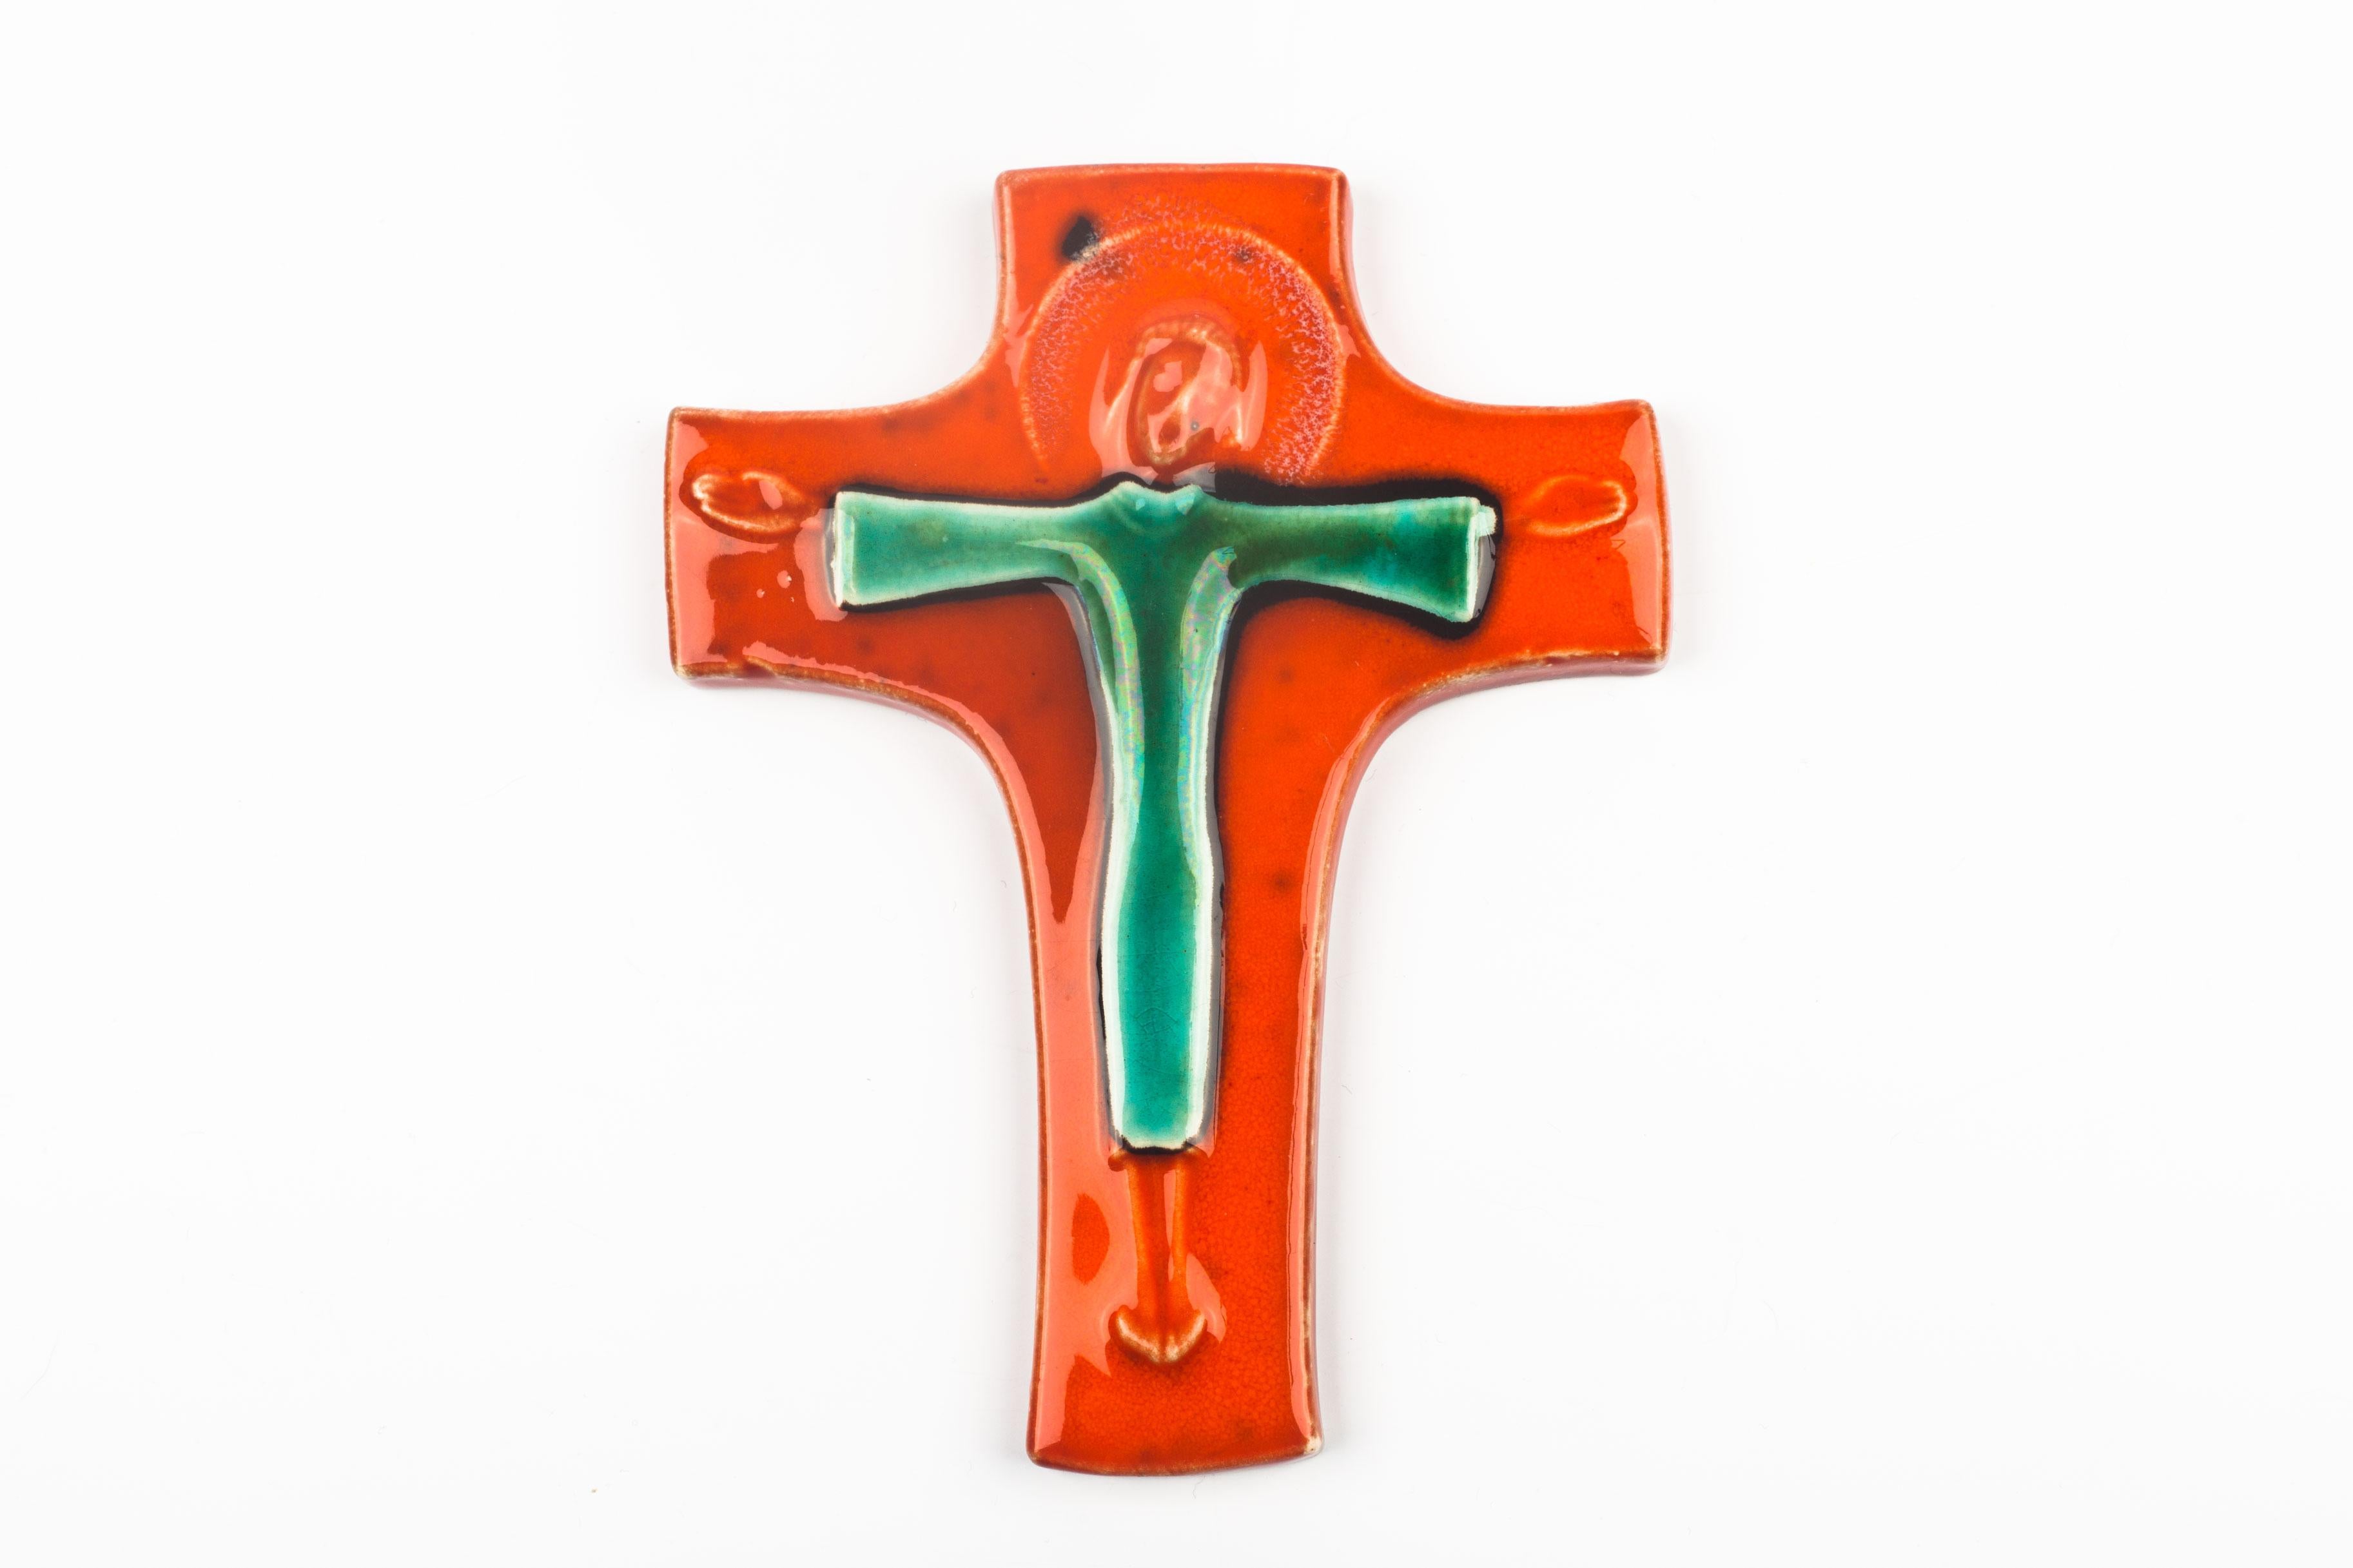 Mid-century, European ceramic crucifix. Hand-painted and glazed in bright orange, green, black and white with subtly raised christ figure at its center. A one-of-a-kind, handcrafted piece that is part of a large collection of crosses made by Belgian